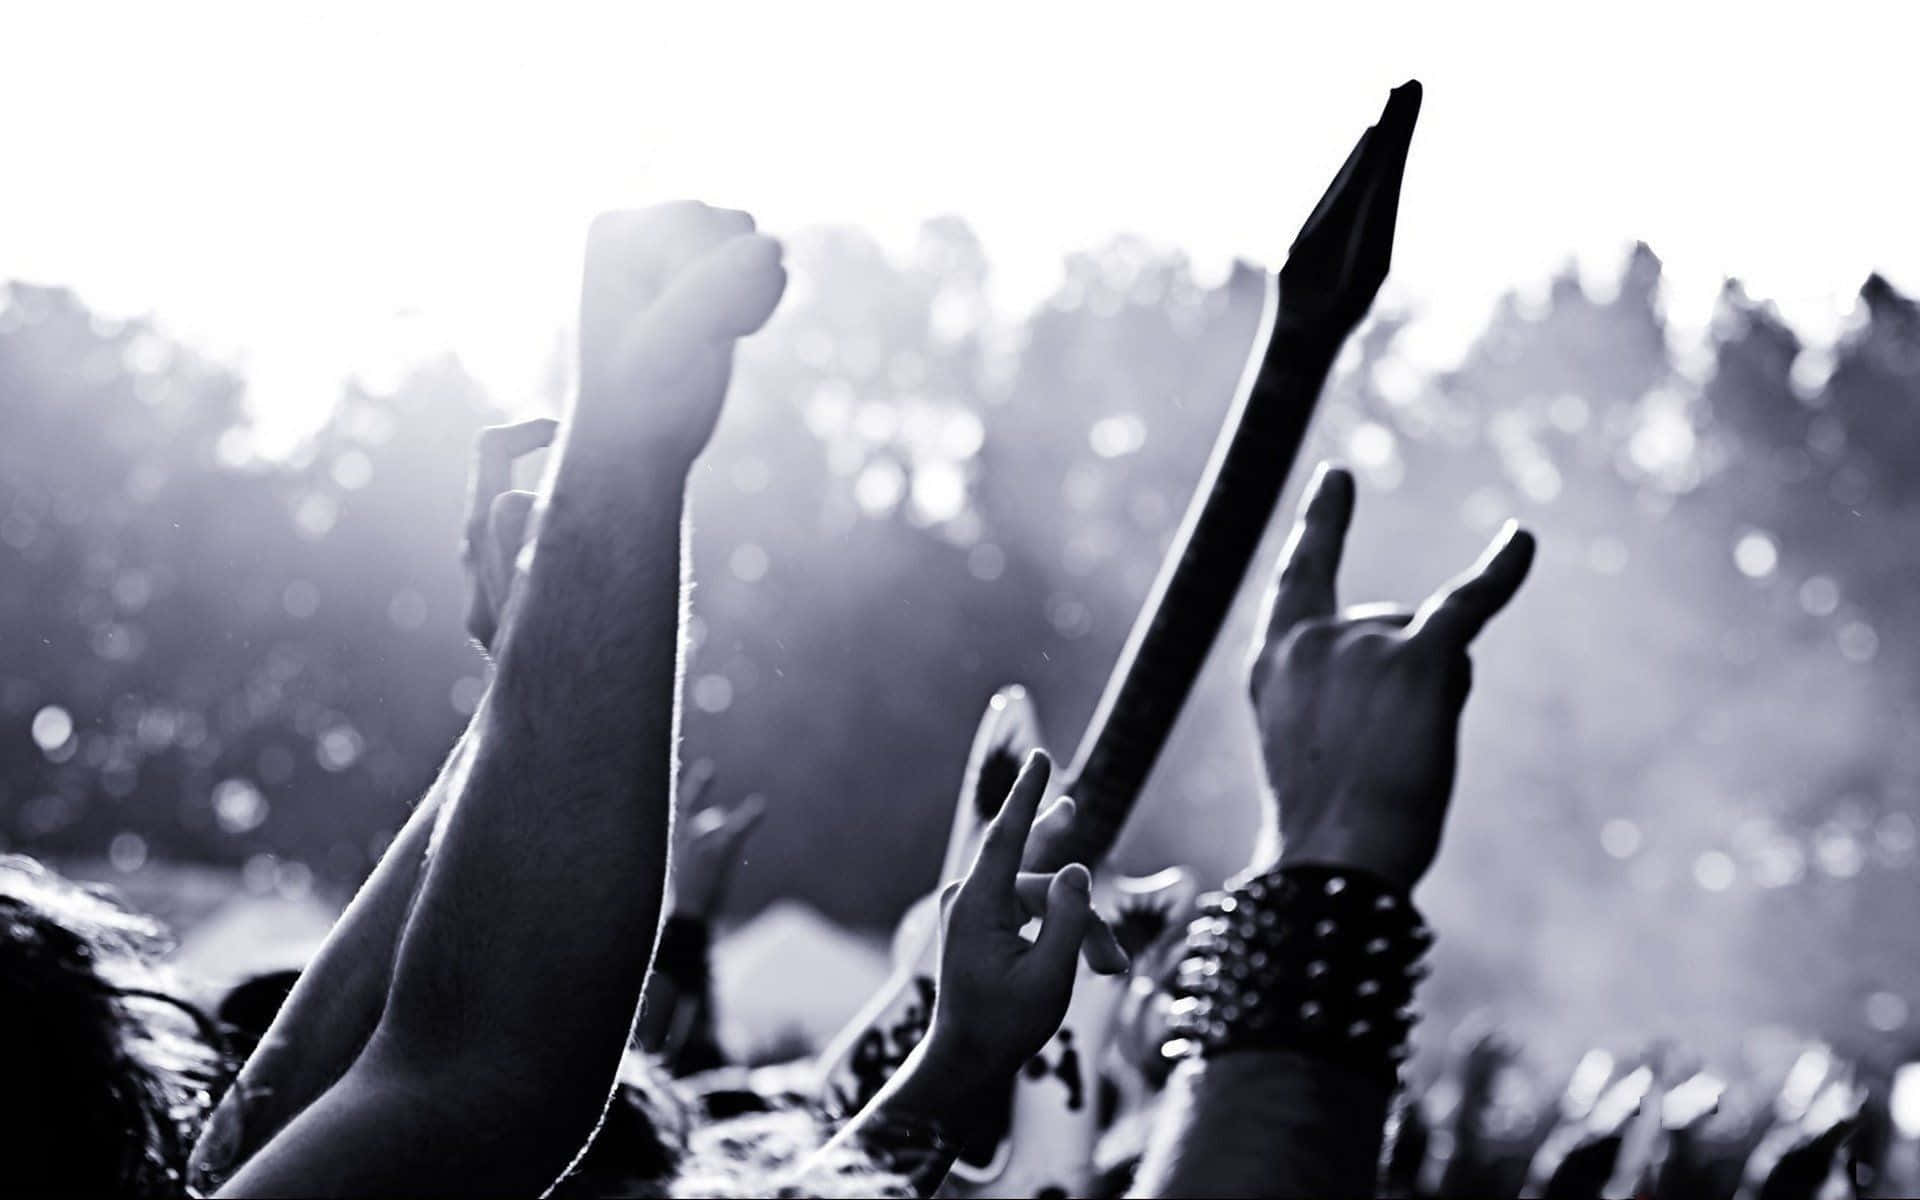 Metal Music Enthusiasts Unite To Create A Loud, Powerful Sound Background